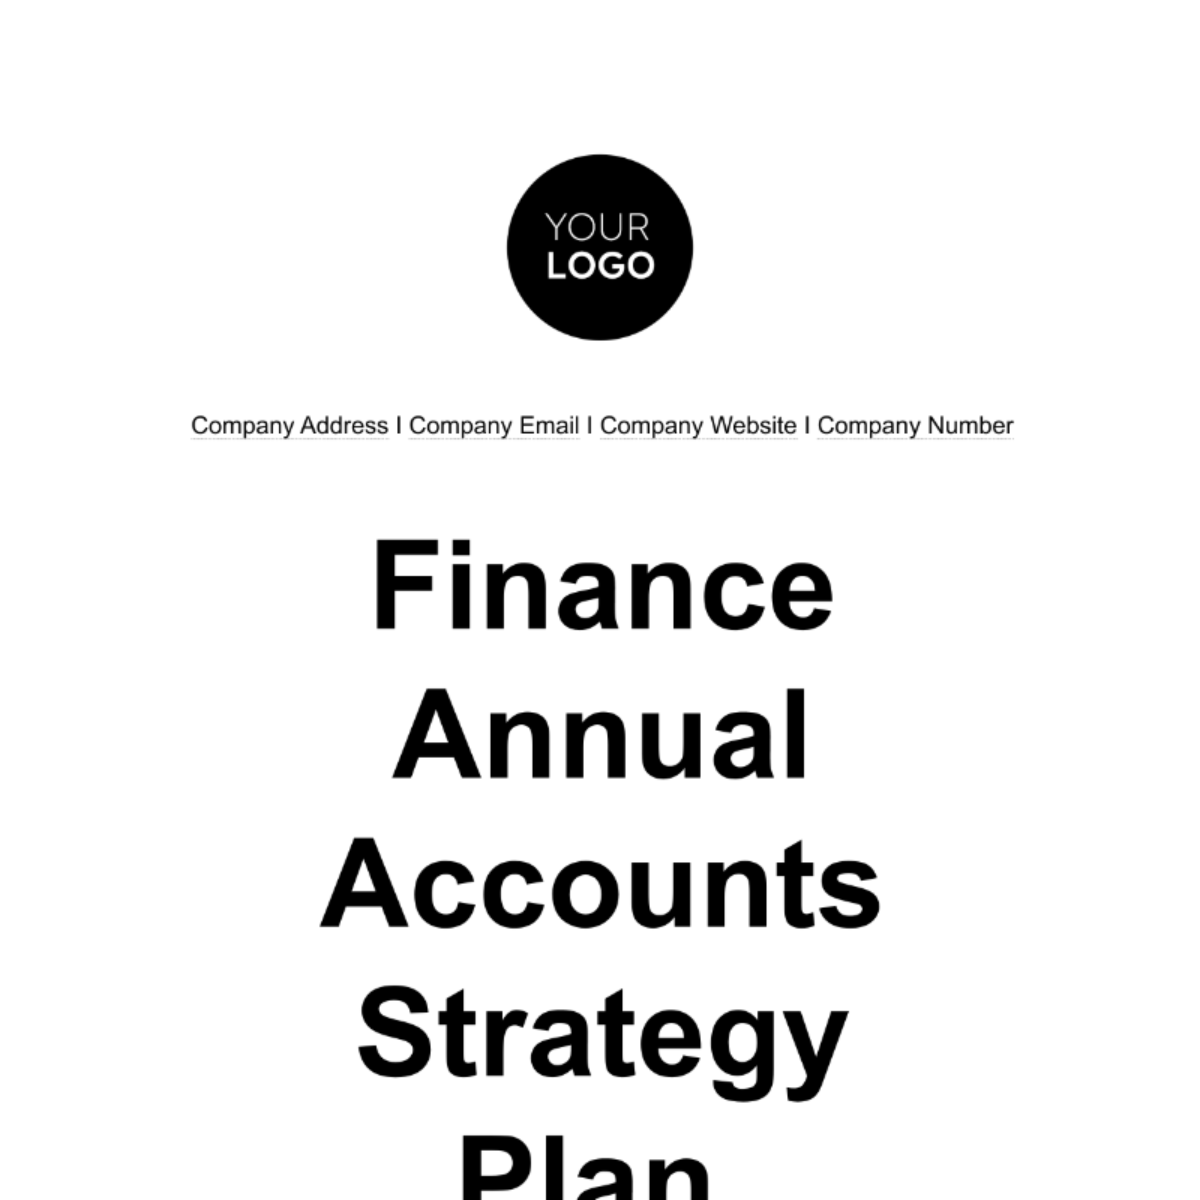 Finance Annual Accounts Strategy Plan Template